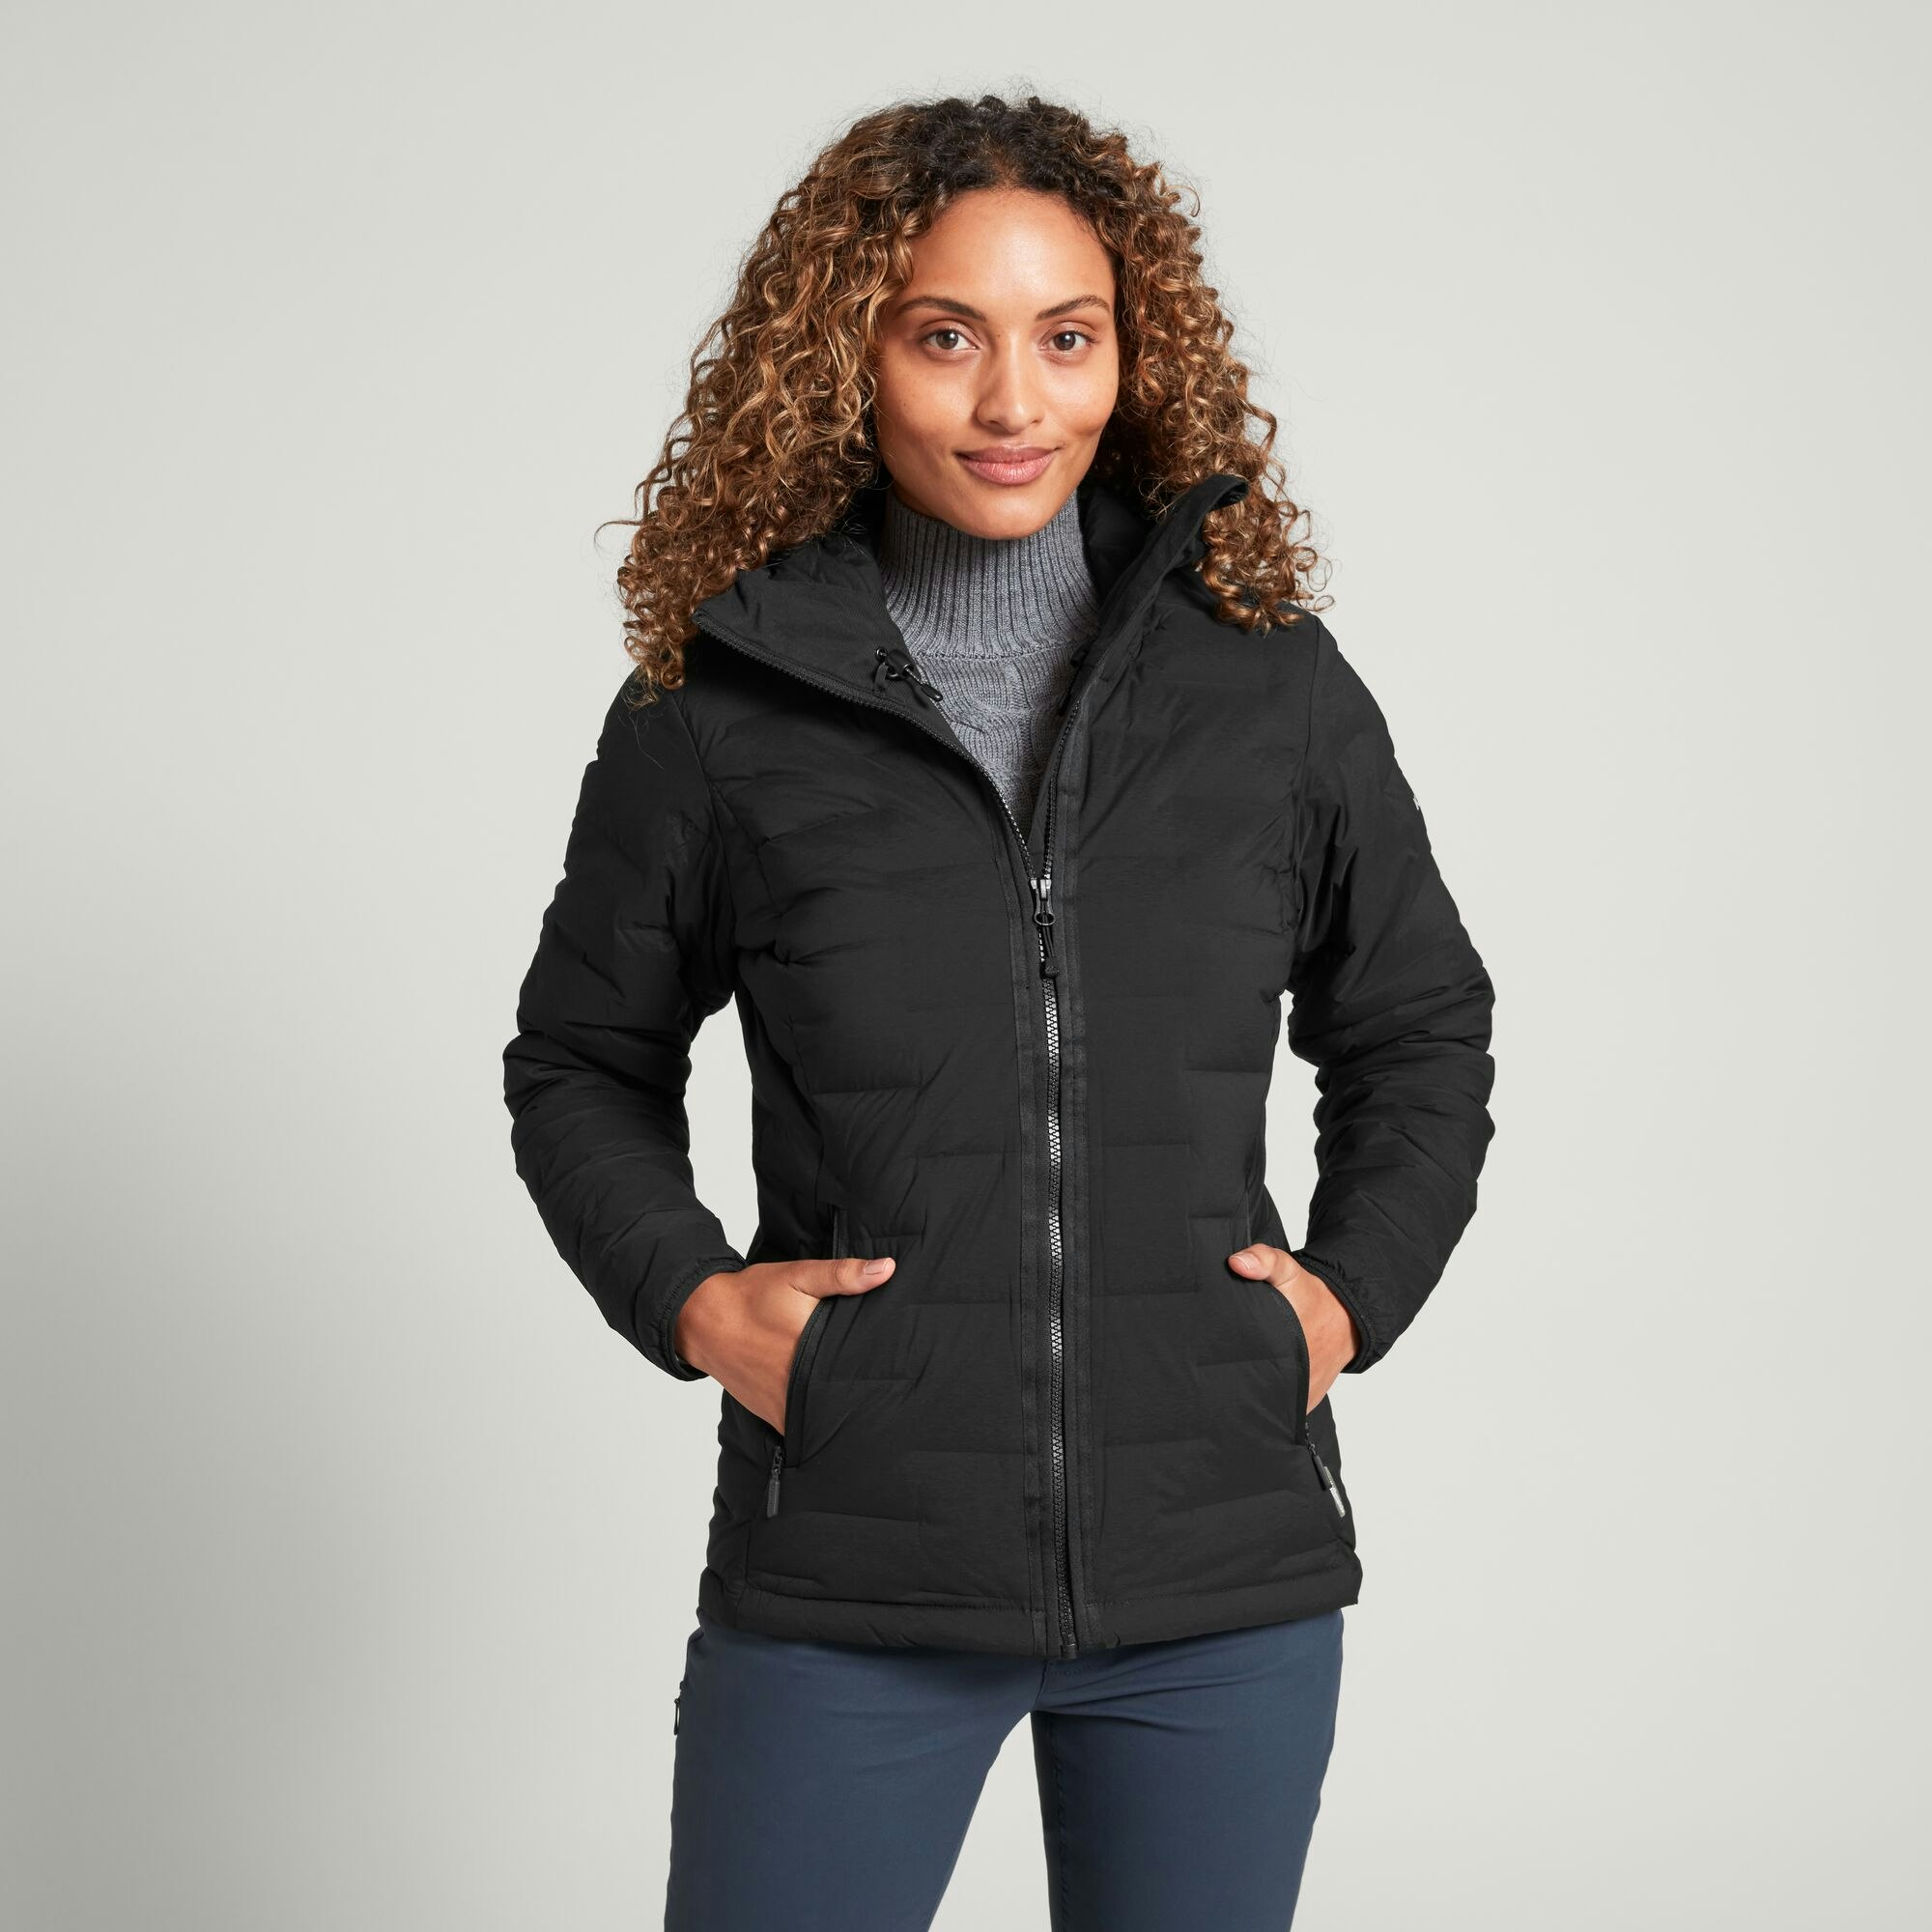 https://kmd-assets.imgix.net/catalog/product/a/0/a0620_902_federate_womens_stretch_down_hooded_puffer_jacket_black_a.jpg?auto=compress%2Cformat&fit=cover&ar=100%3A100&ixlib=react-9.5.1-beta.1